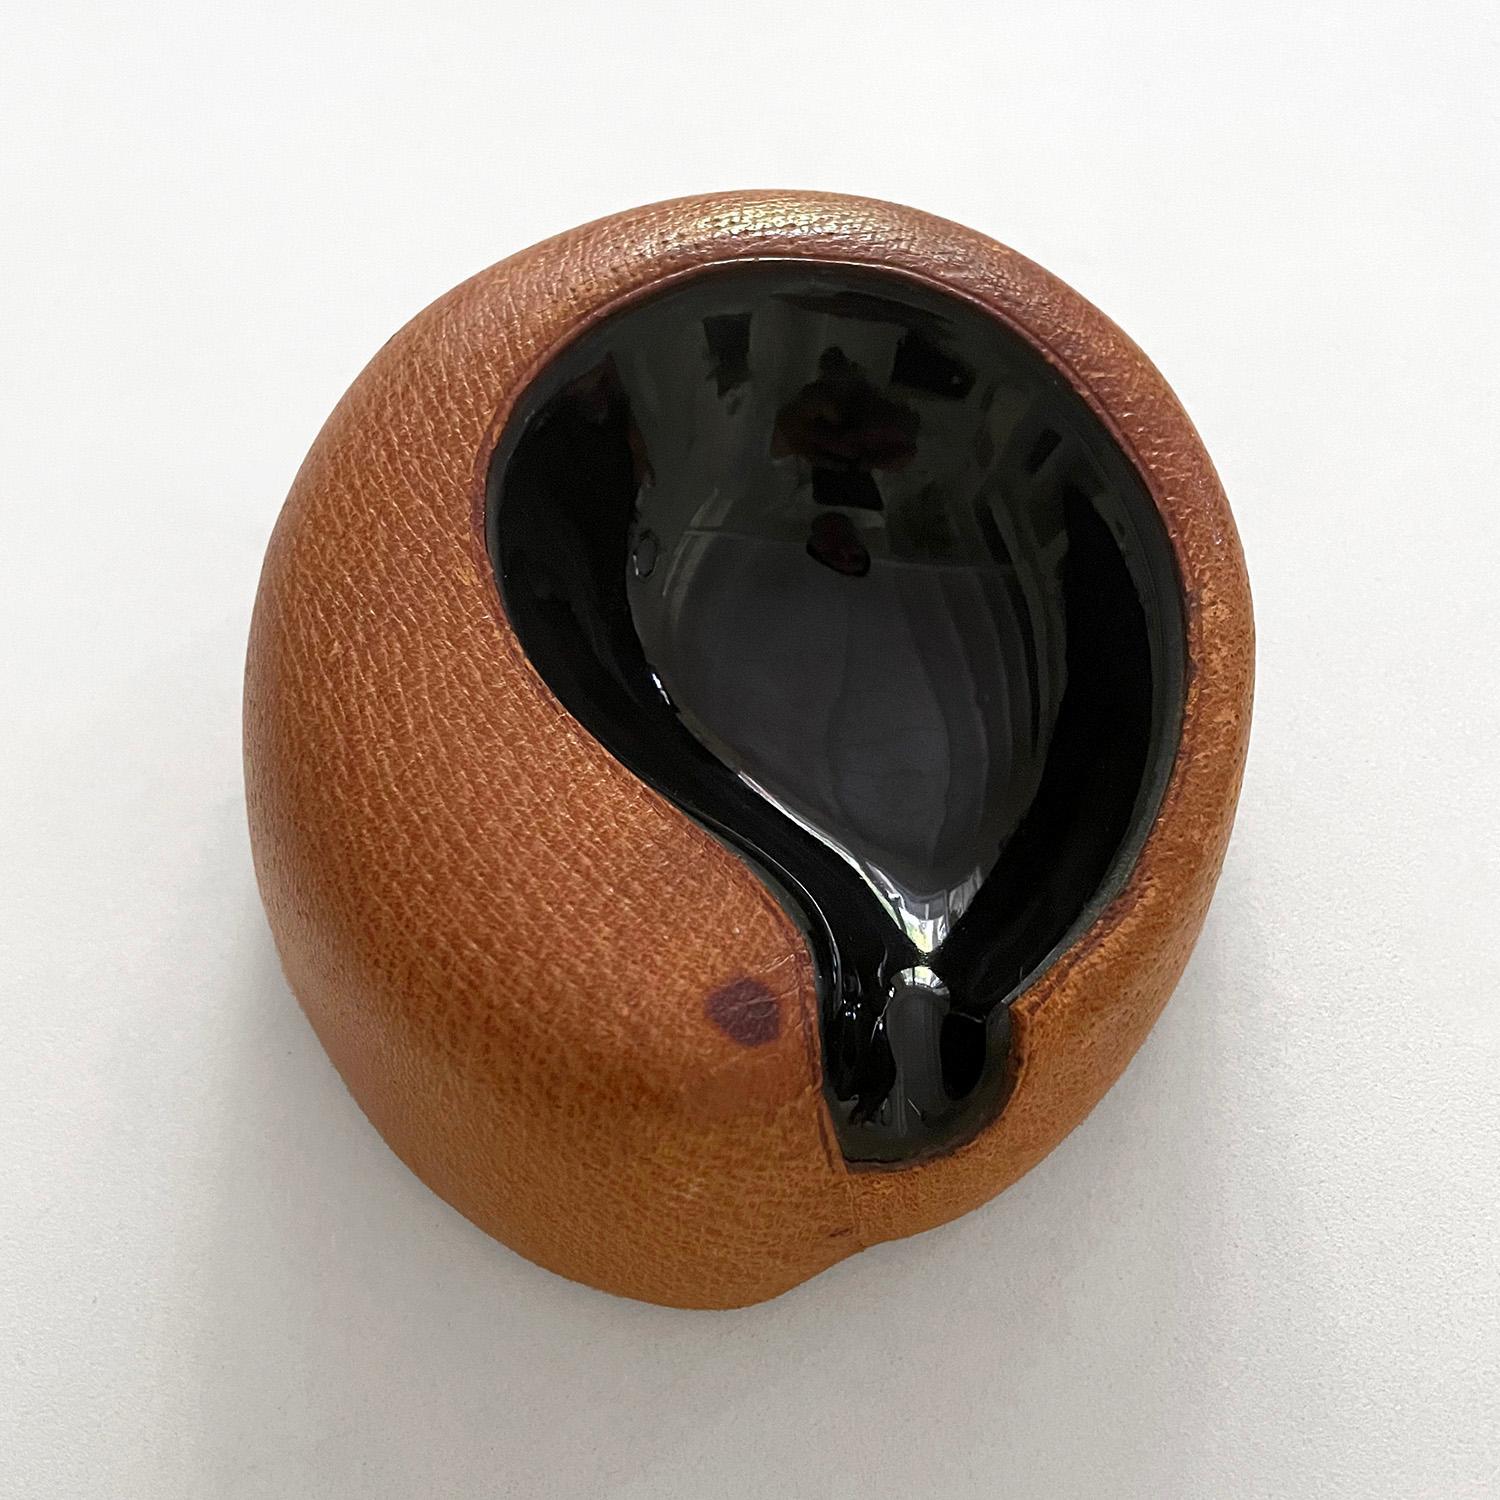 Georges Jouve ashtray
France, circa 1940’s
Rich saddle leather wraps the teardrop shaped ceramic ashtray
Light markings and patina to the leather add to the character and charm of this piece.
 